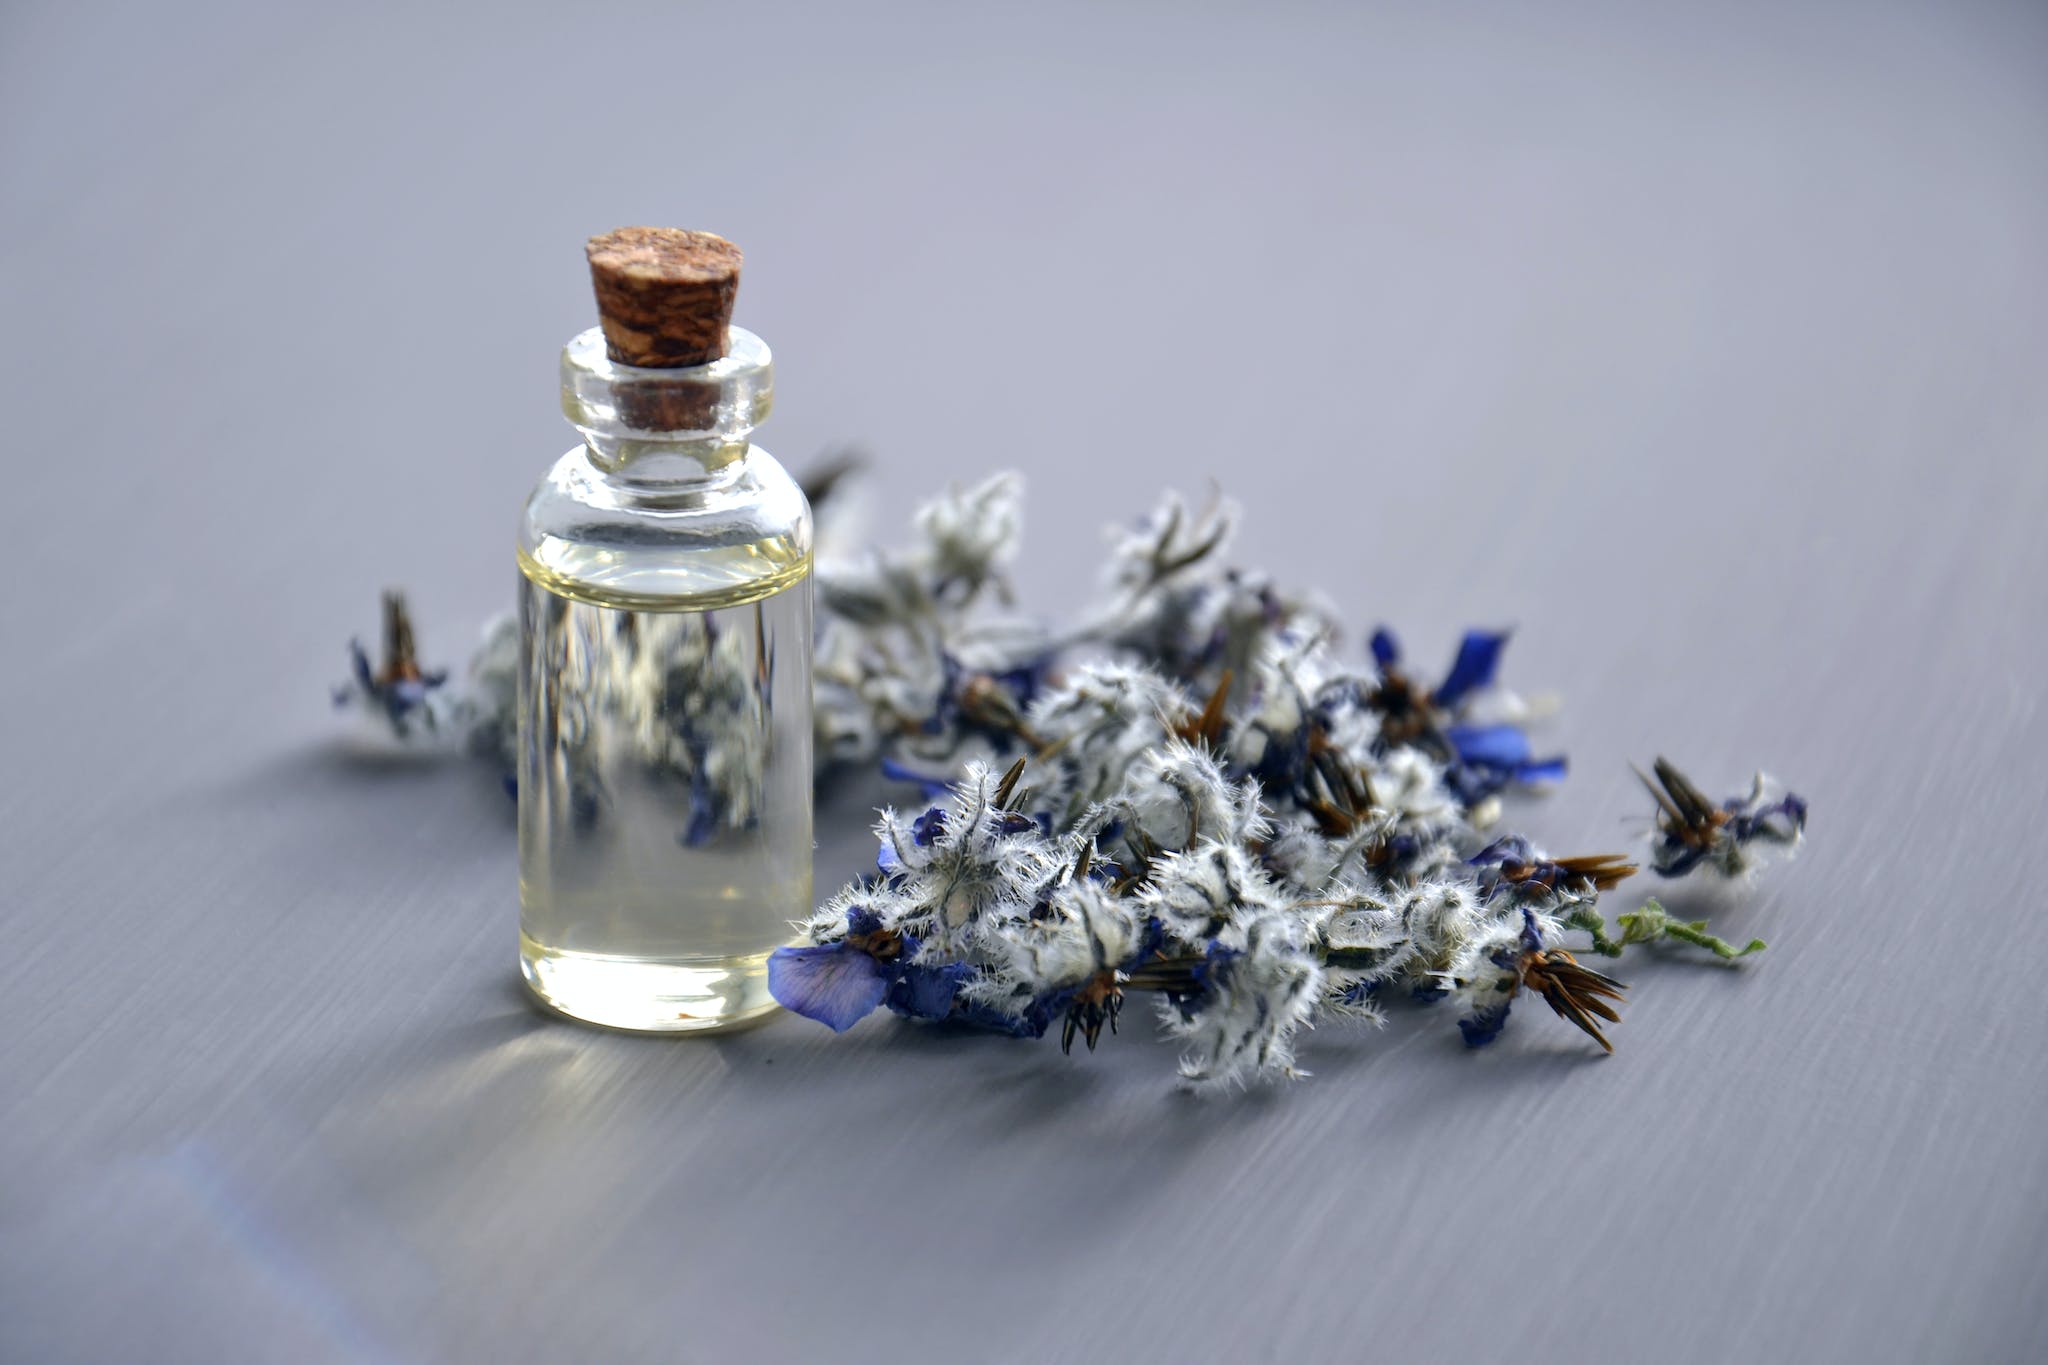 Essential Oils For Stress Relief: Using The Healing Powers Of Aromatherapy To Promote Relaxation And Well-Being